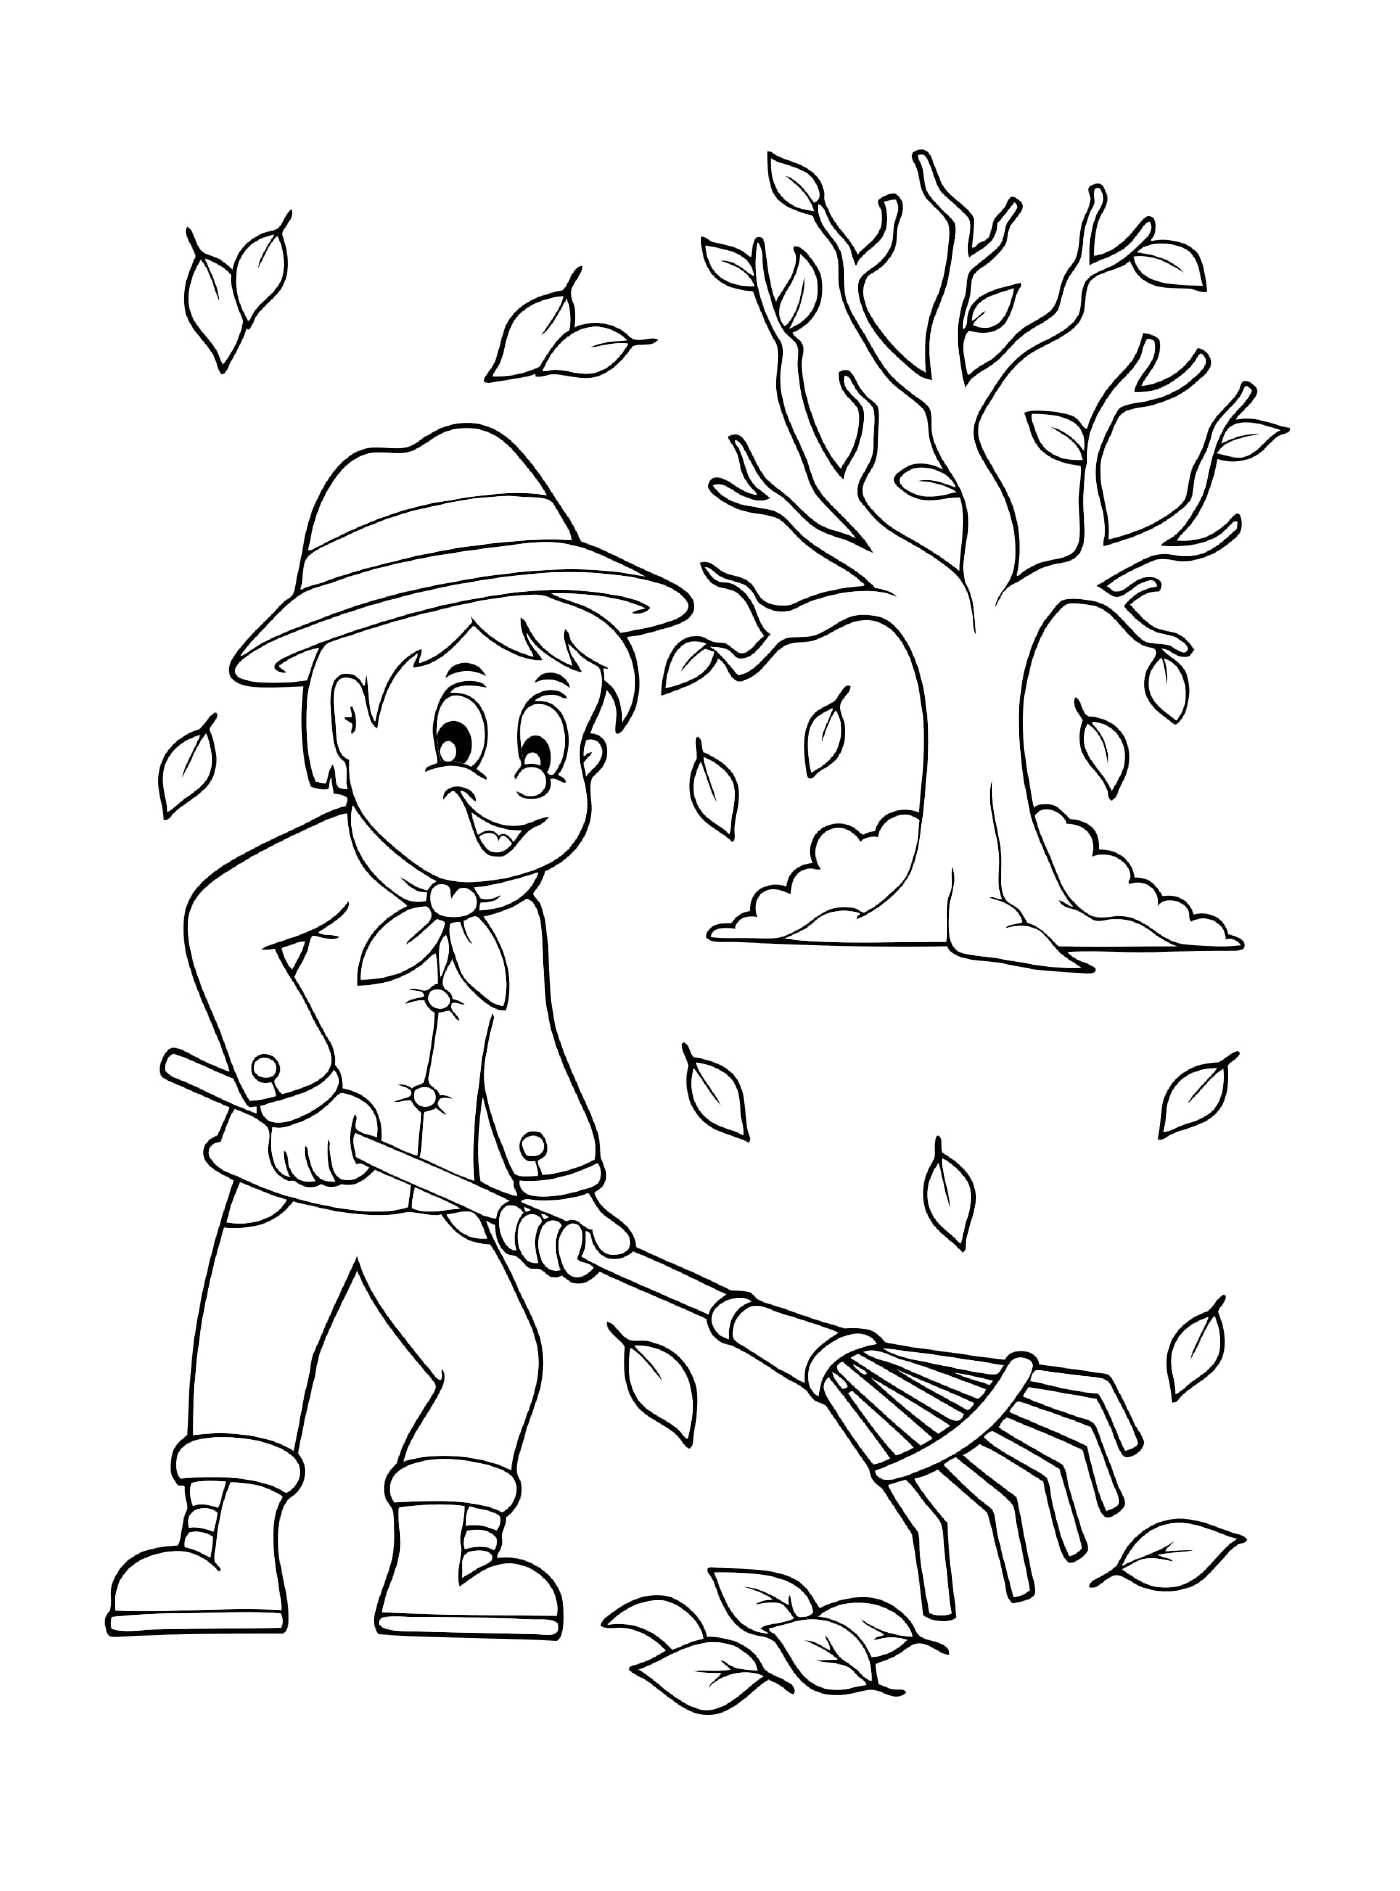  A child ratifies the leaves in autumn 